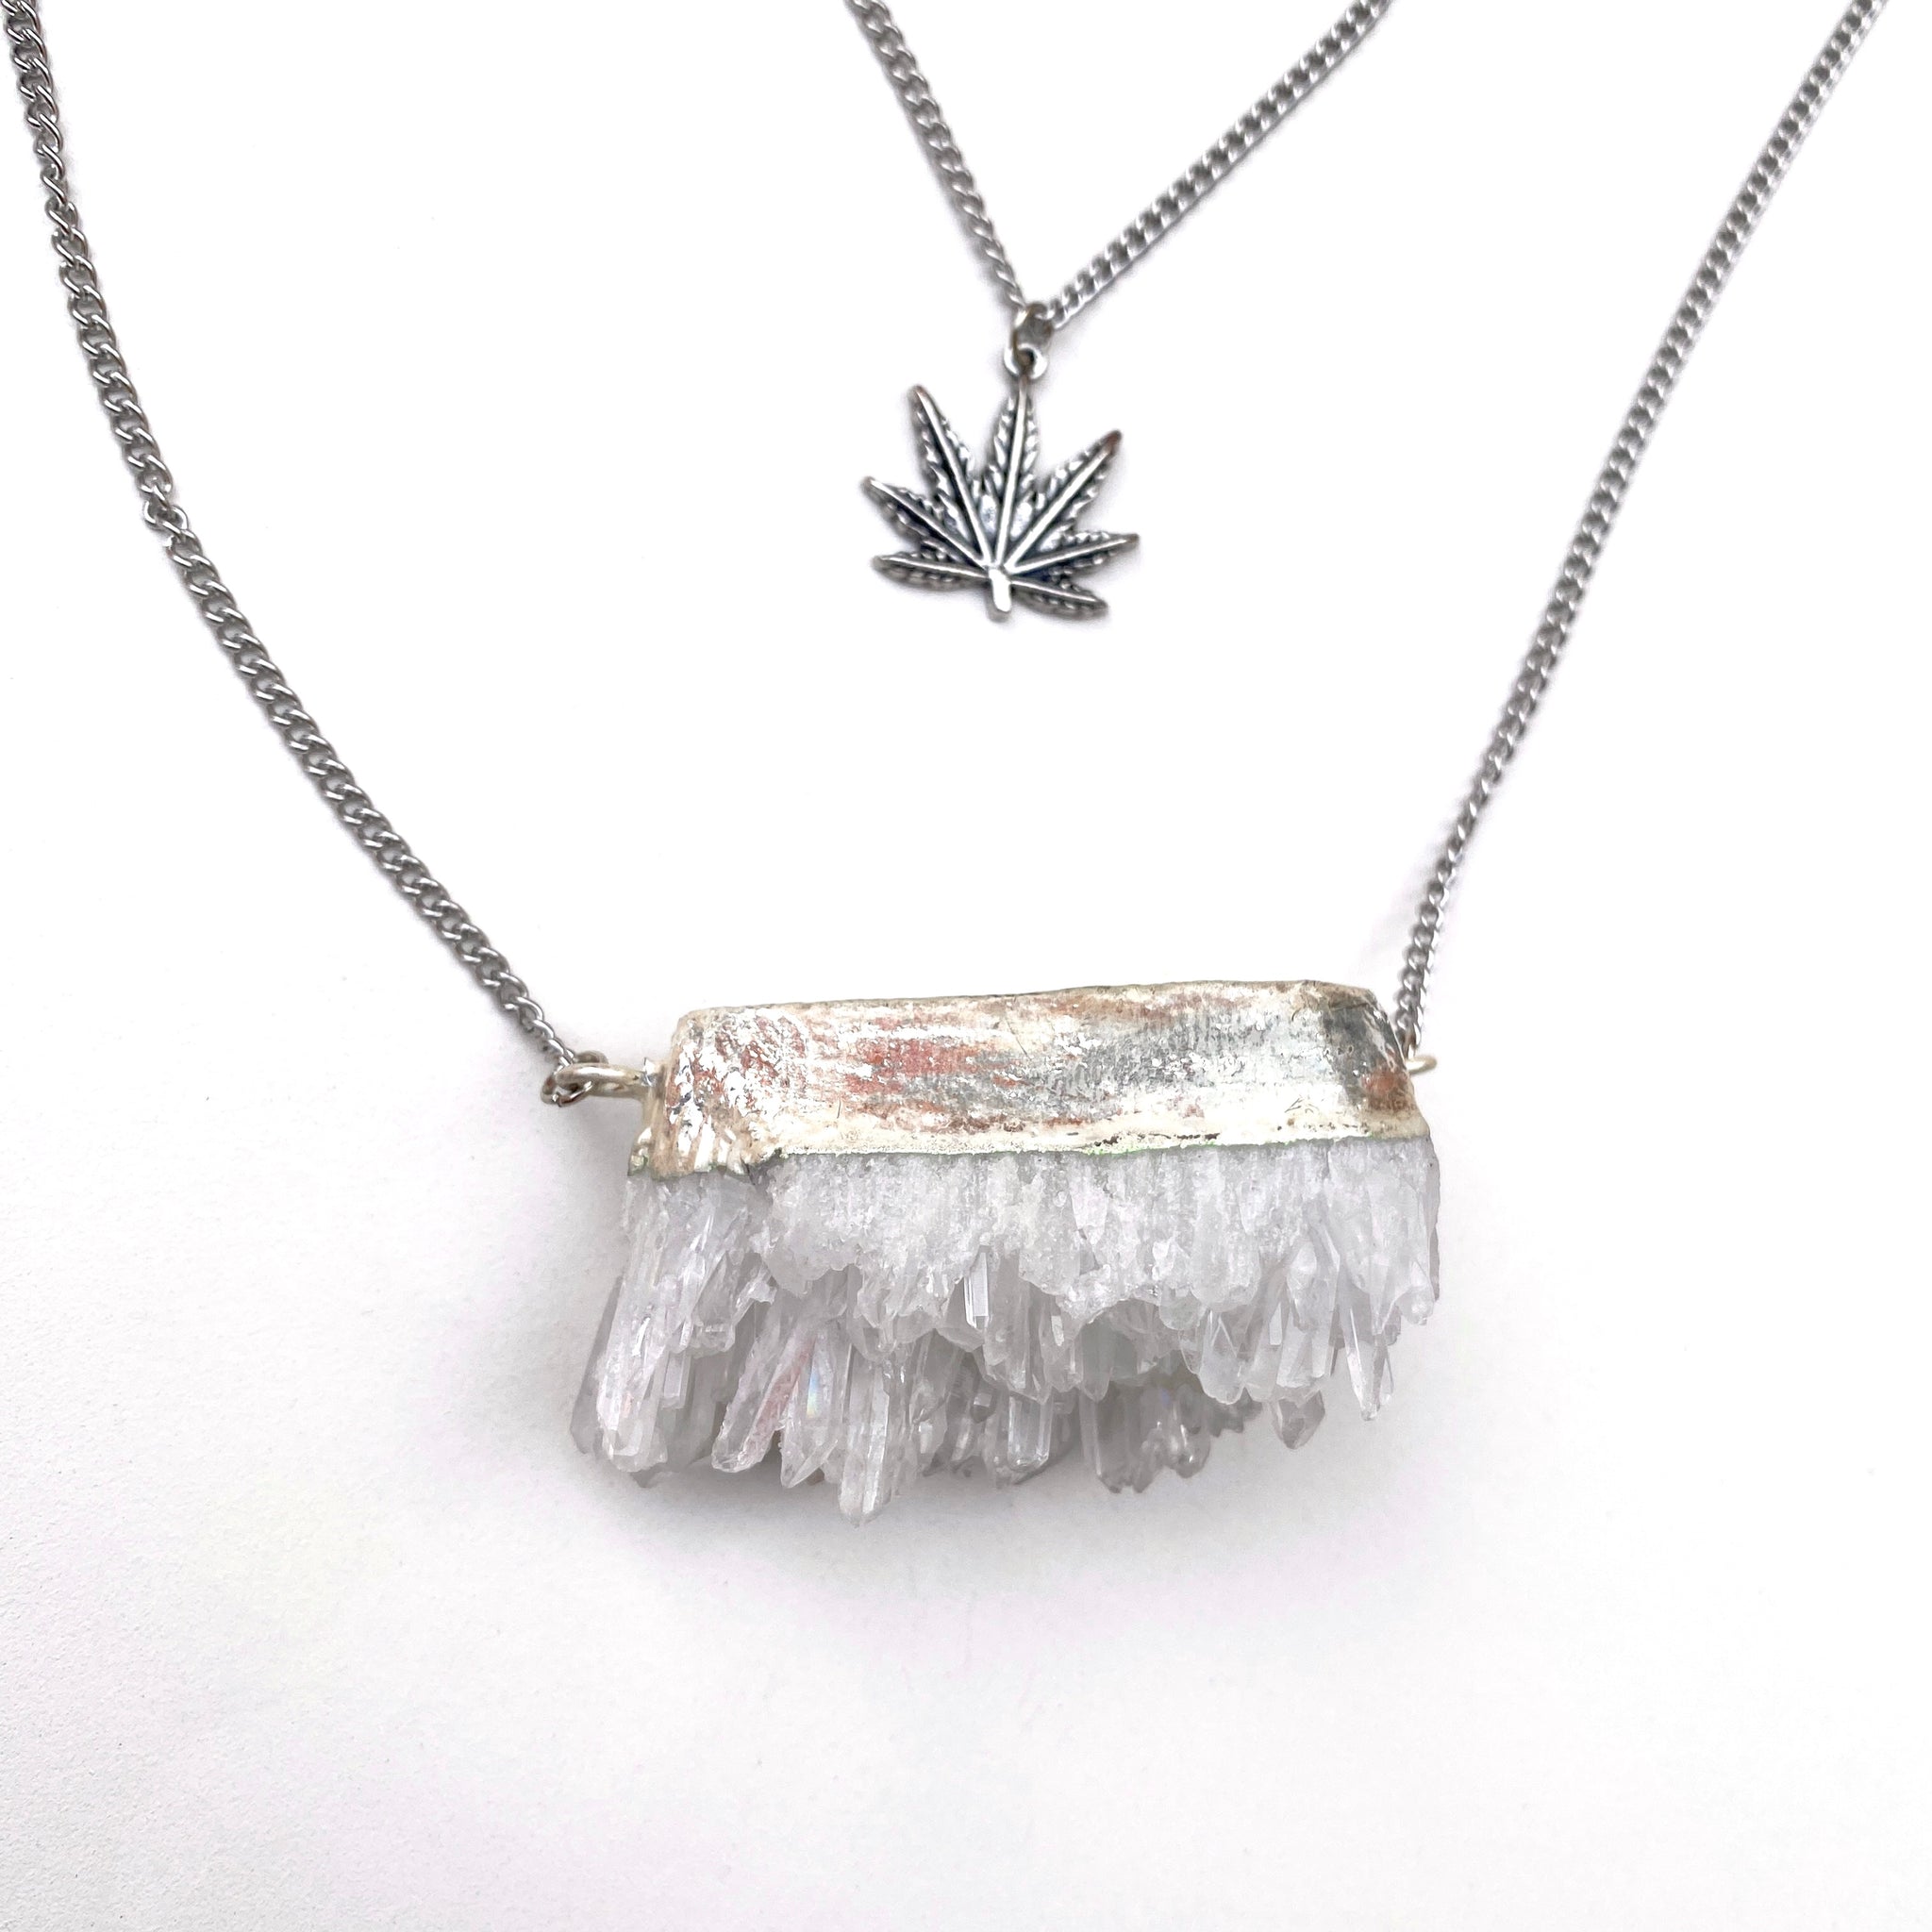 Crystal Layered Weed Leaf Necklace - Silver